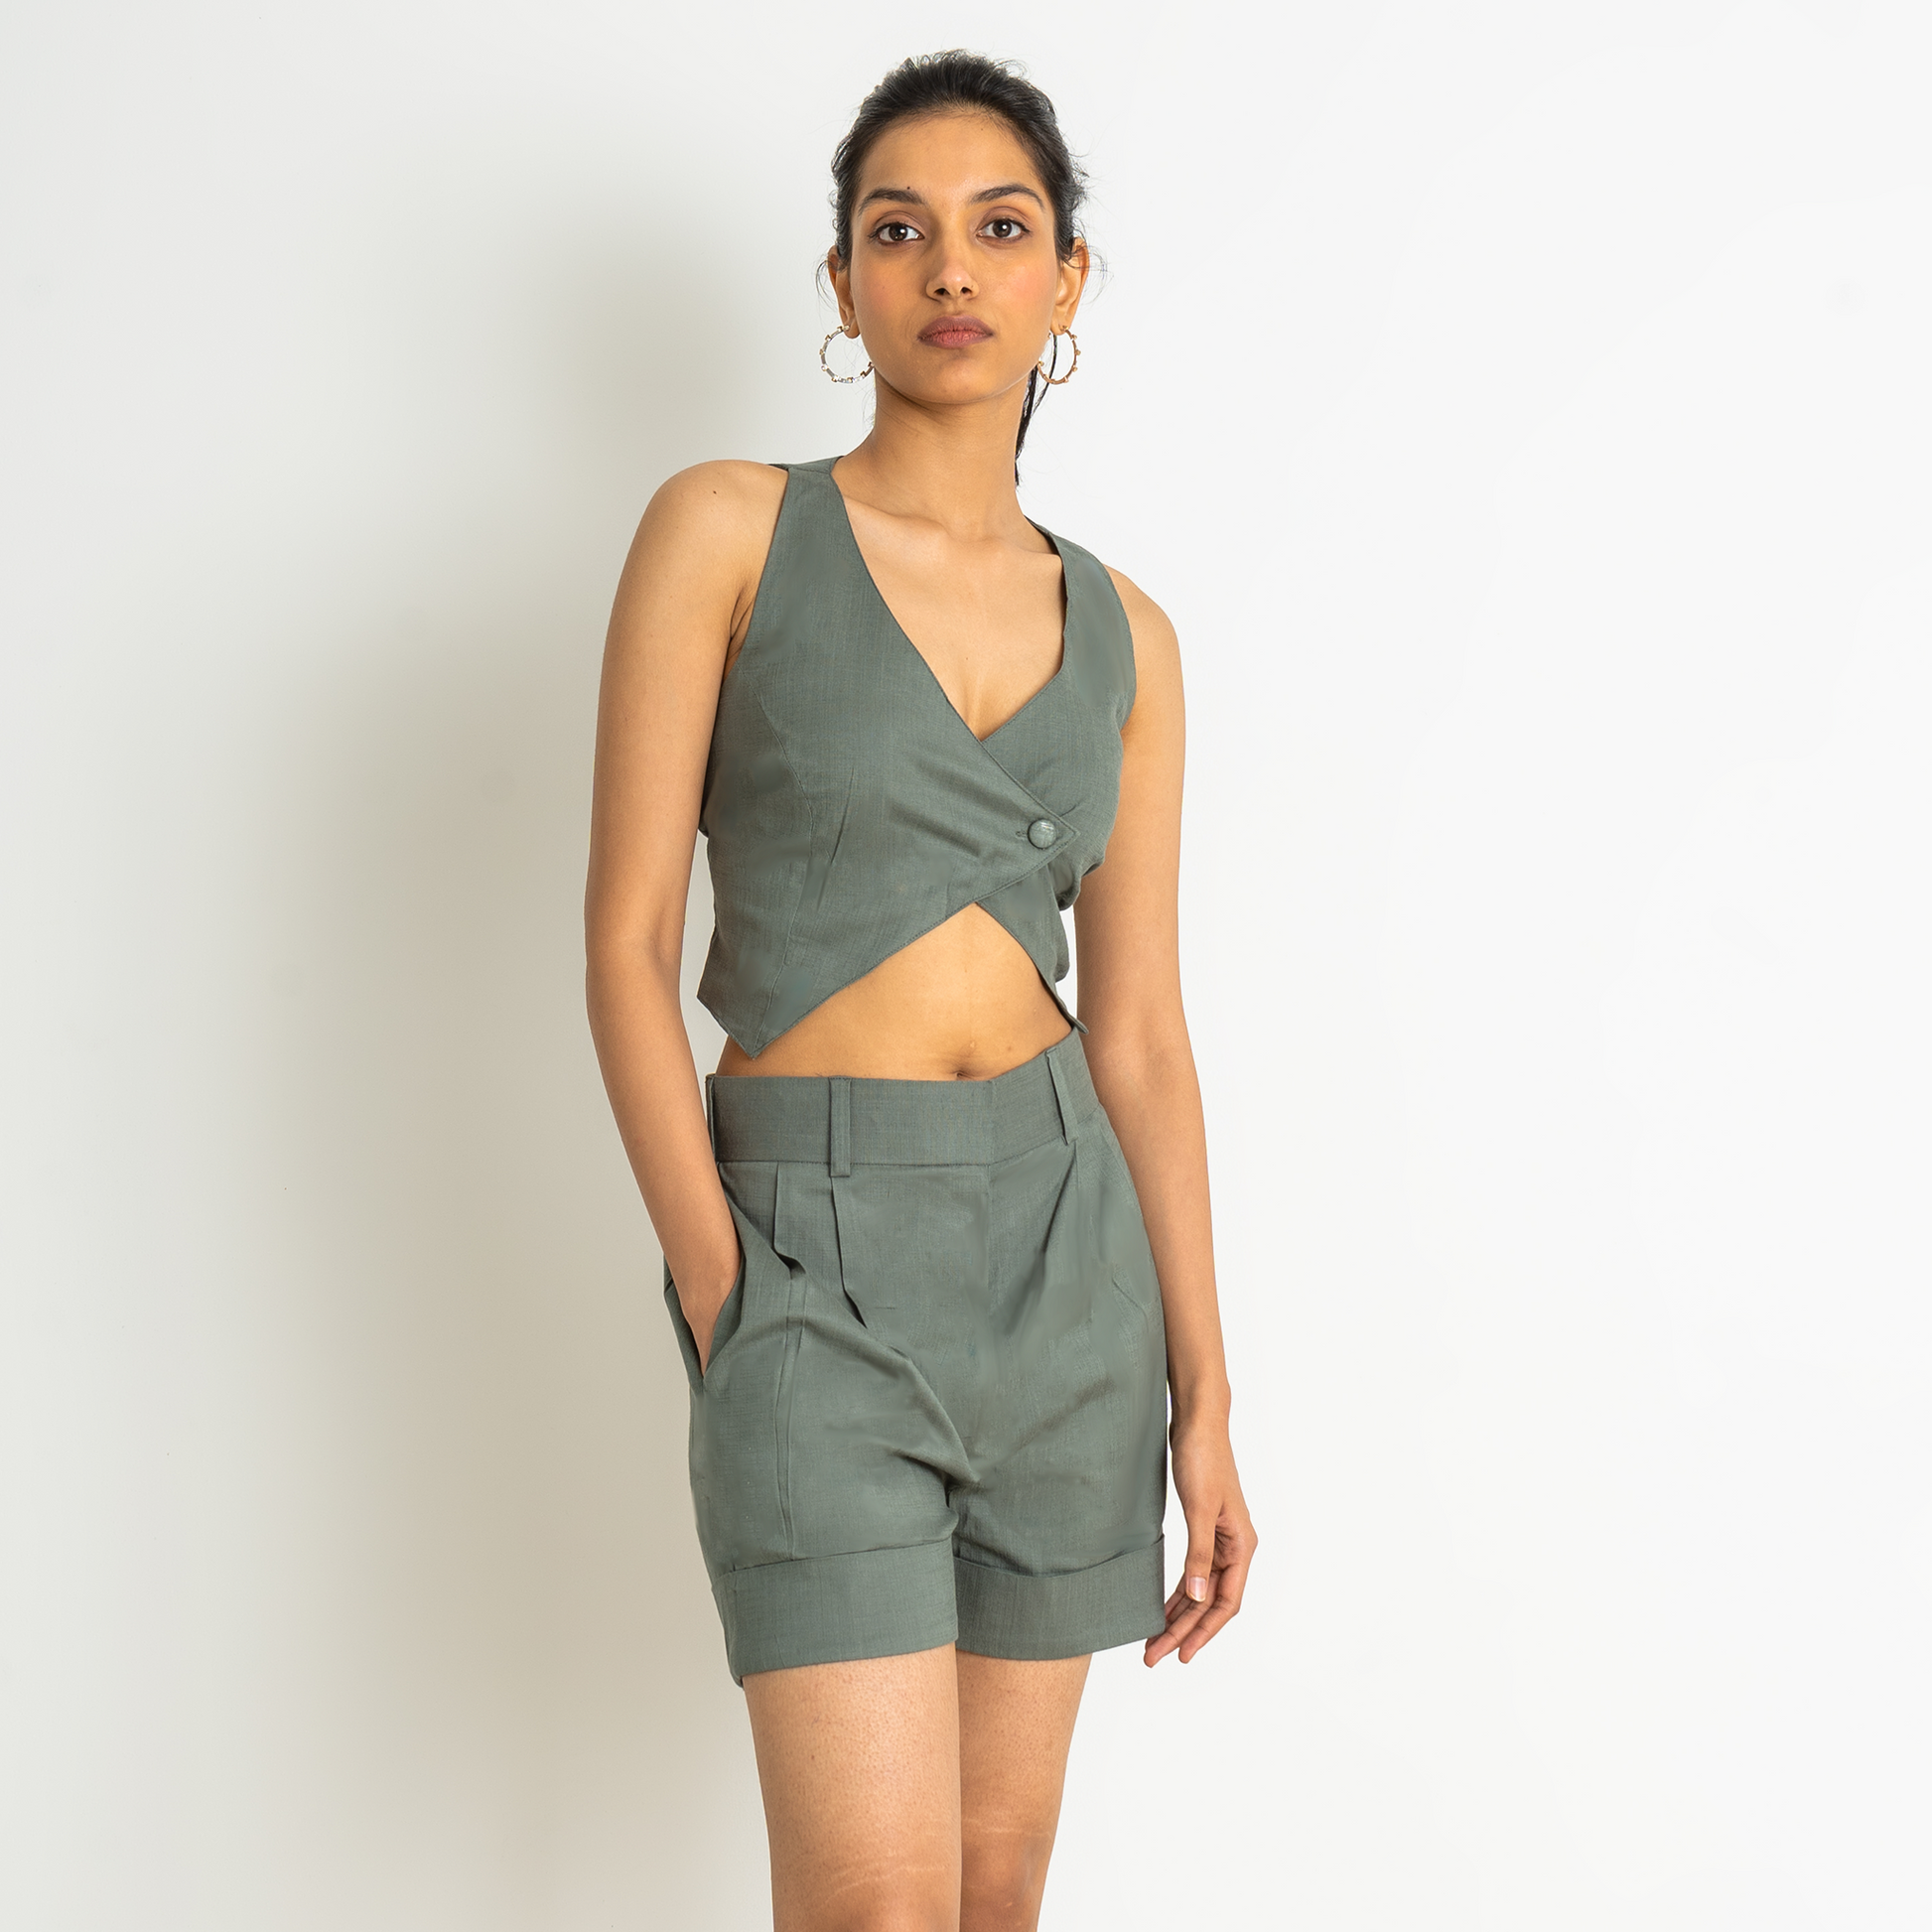 Olive Asymmetrical Crop Top and Shorts Set